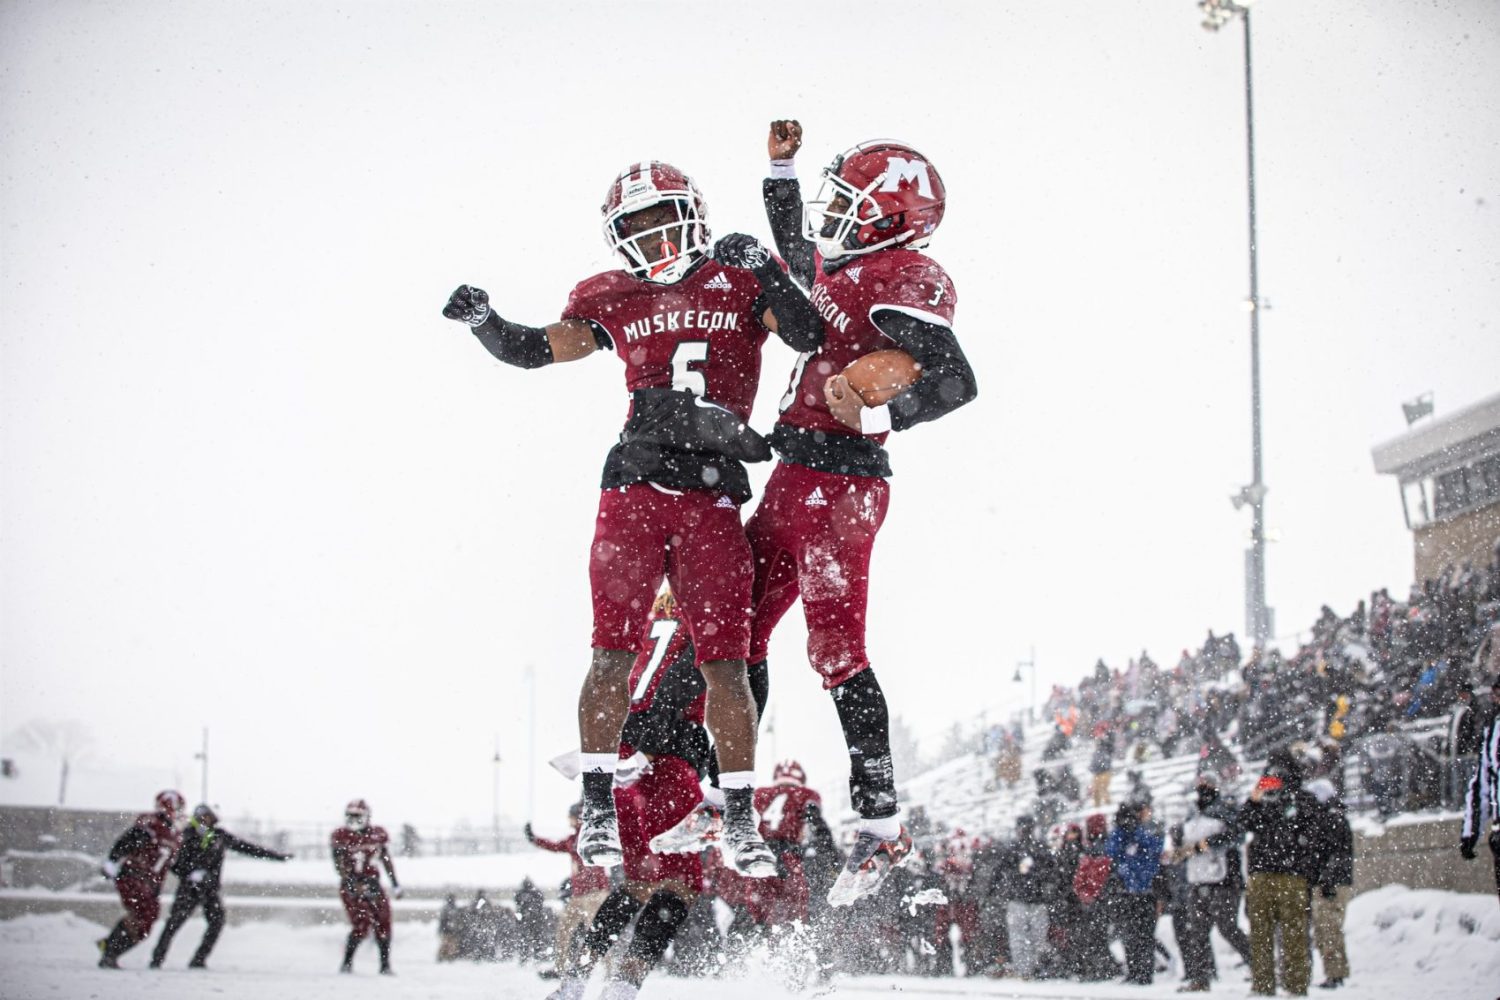 Can Muskegon dethrone King? Tom Kendra picks the winners of all 8 state championship games